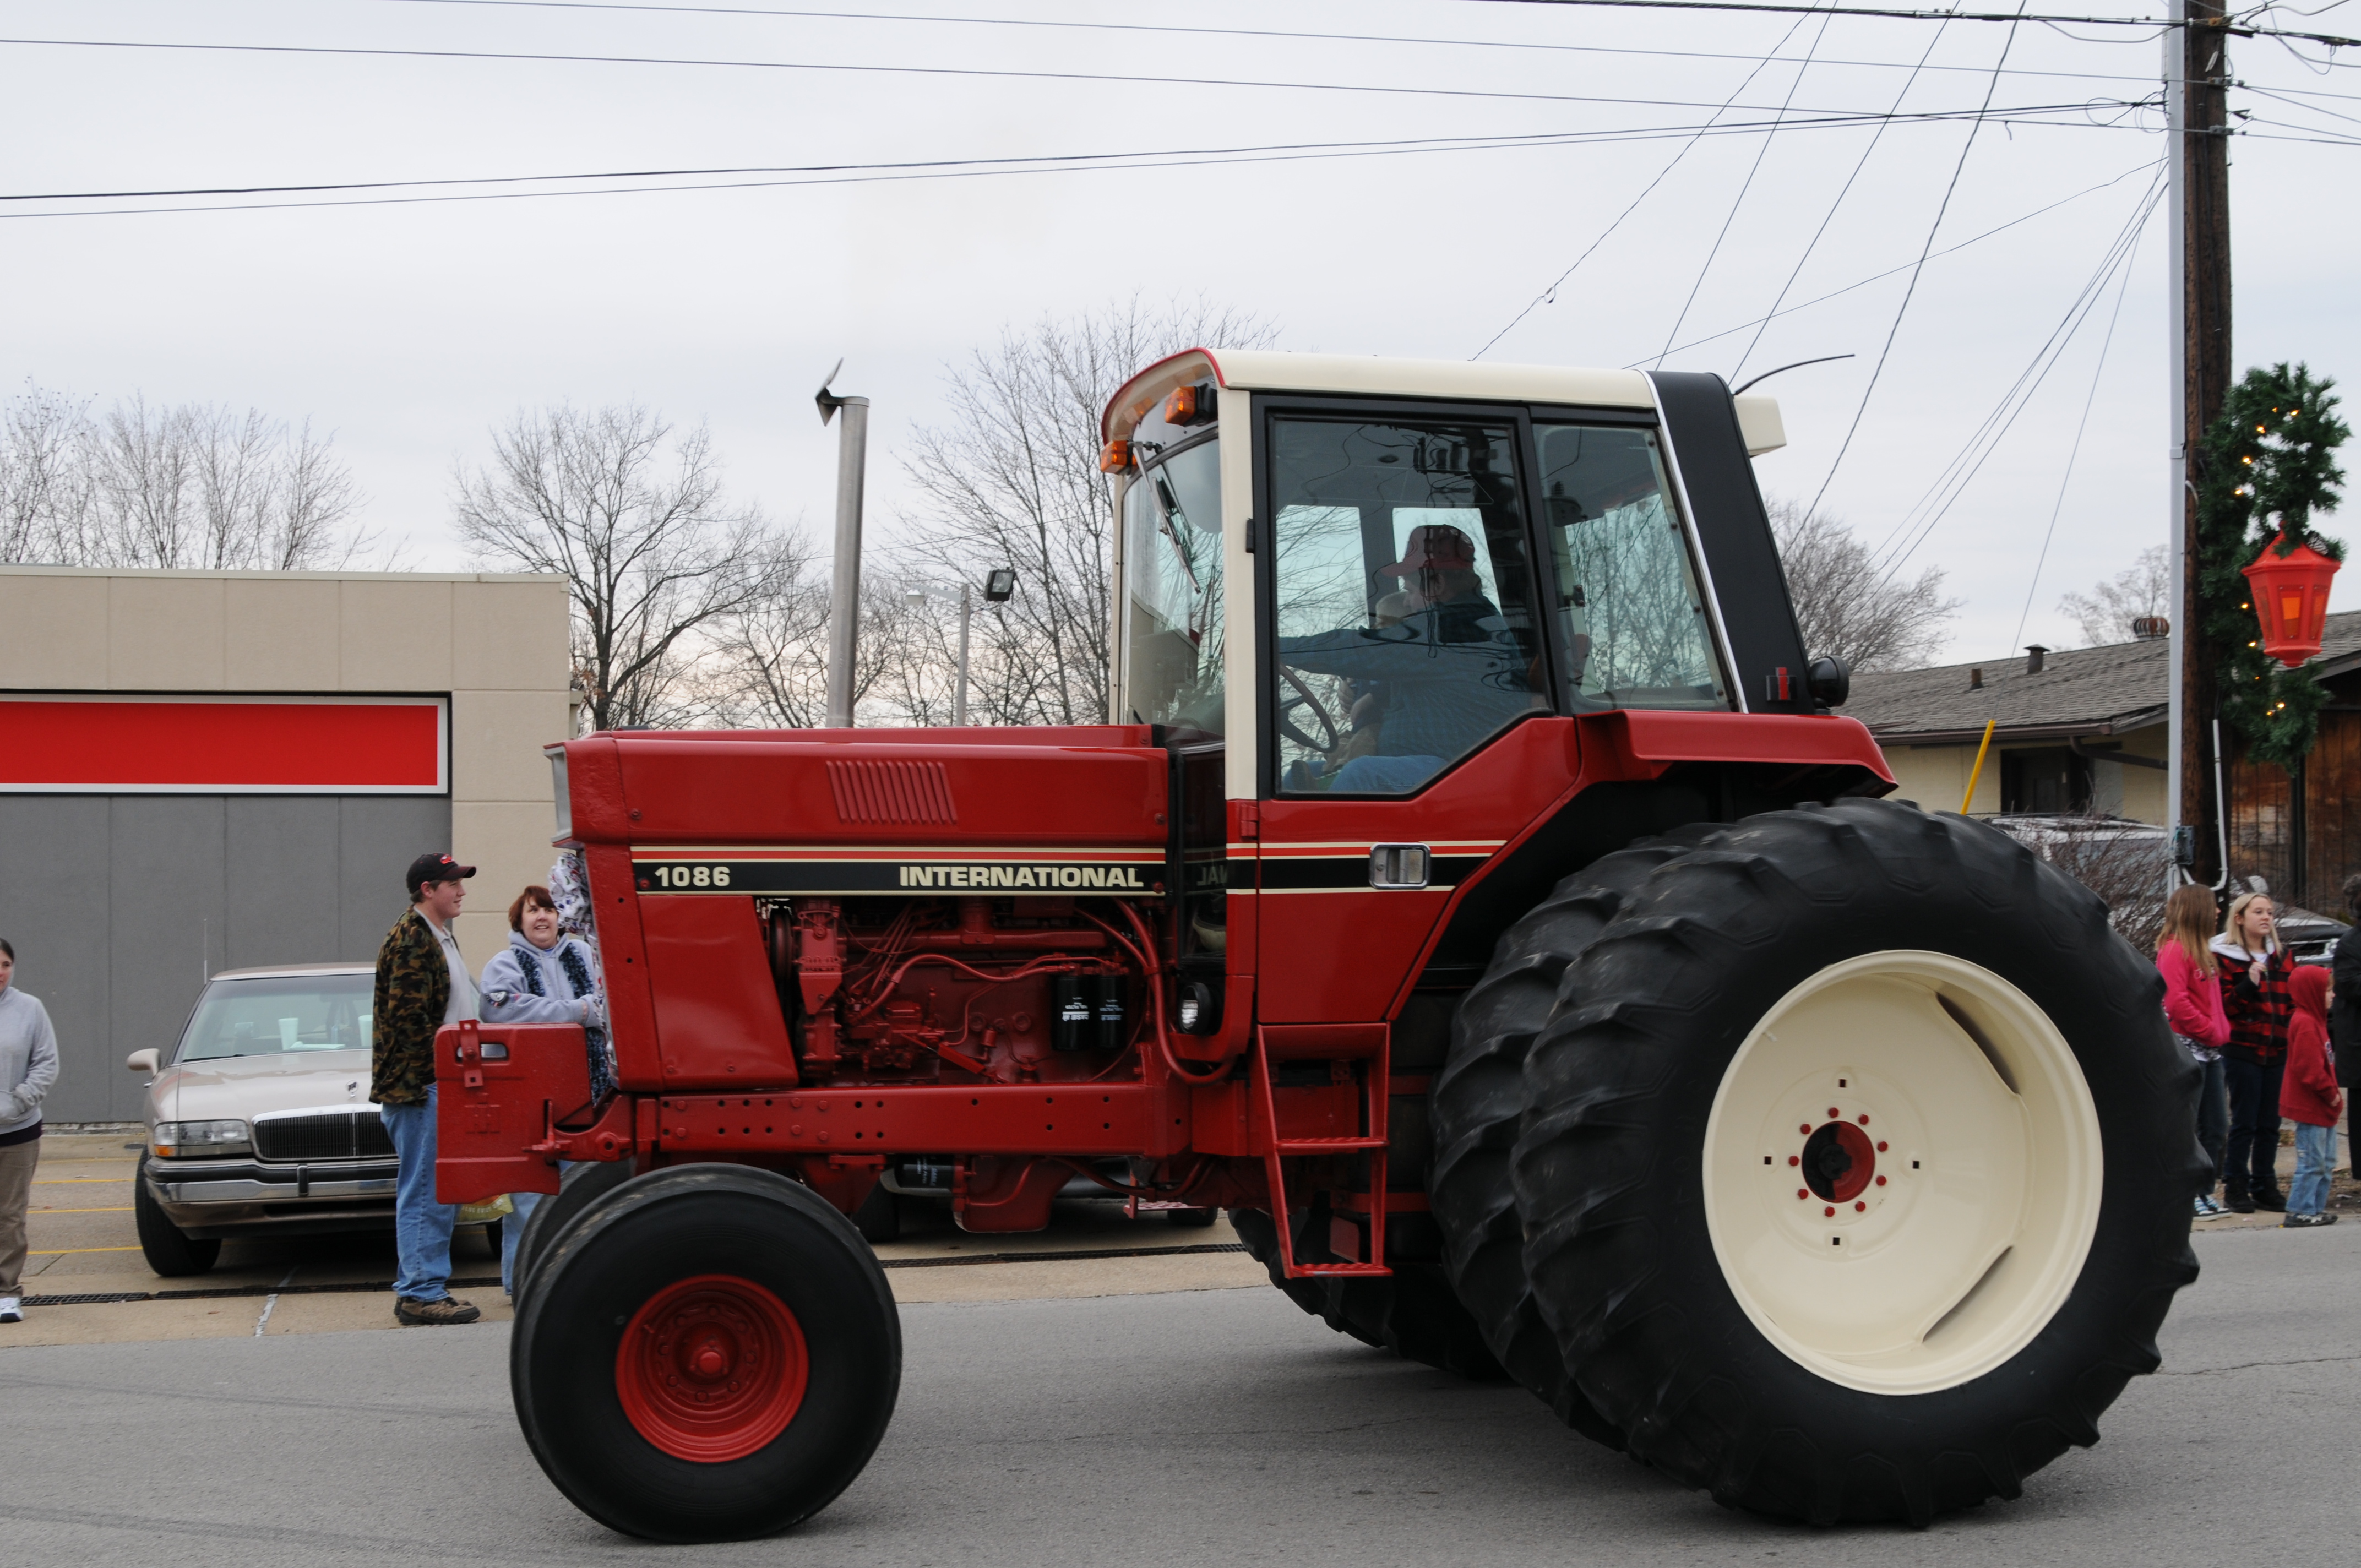 International Harvester 1086 Photo Gallery: Photo #07 out of 9 ...